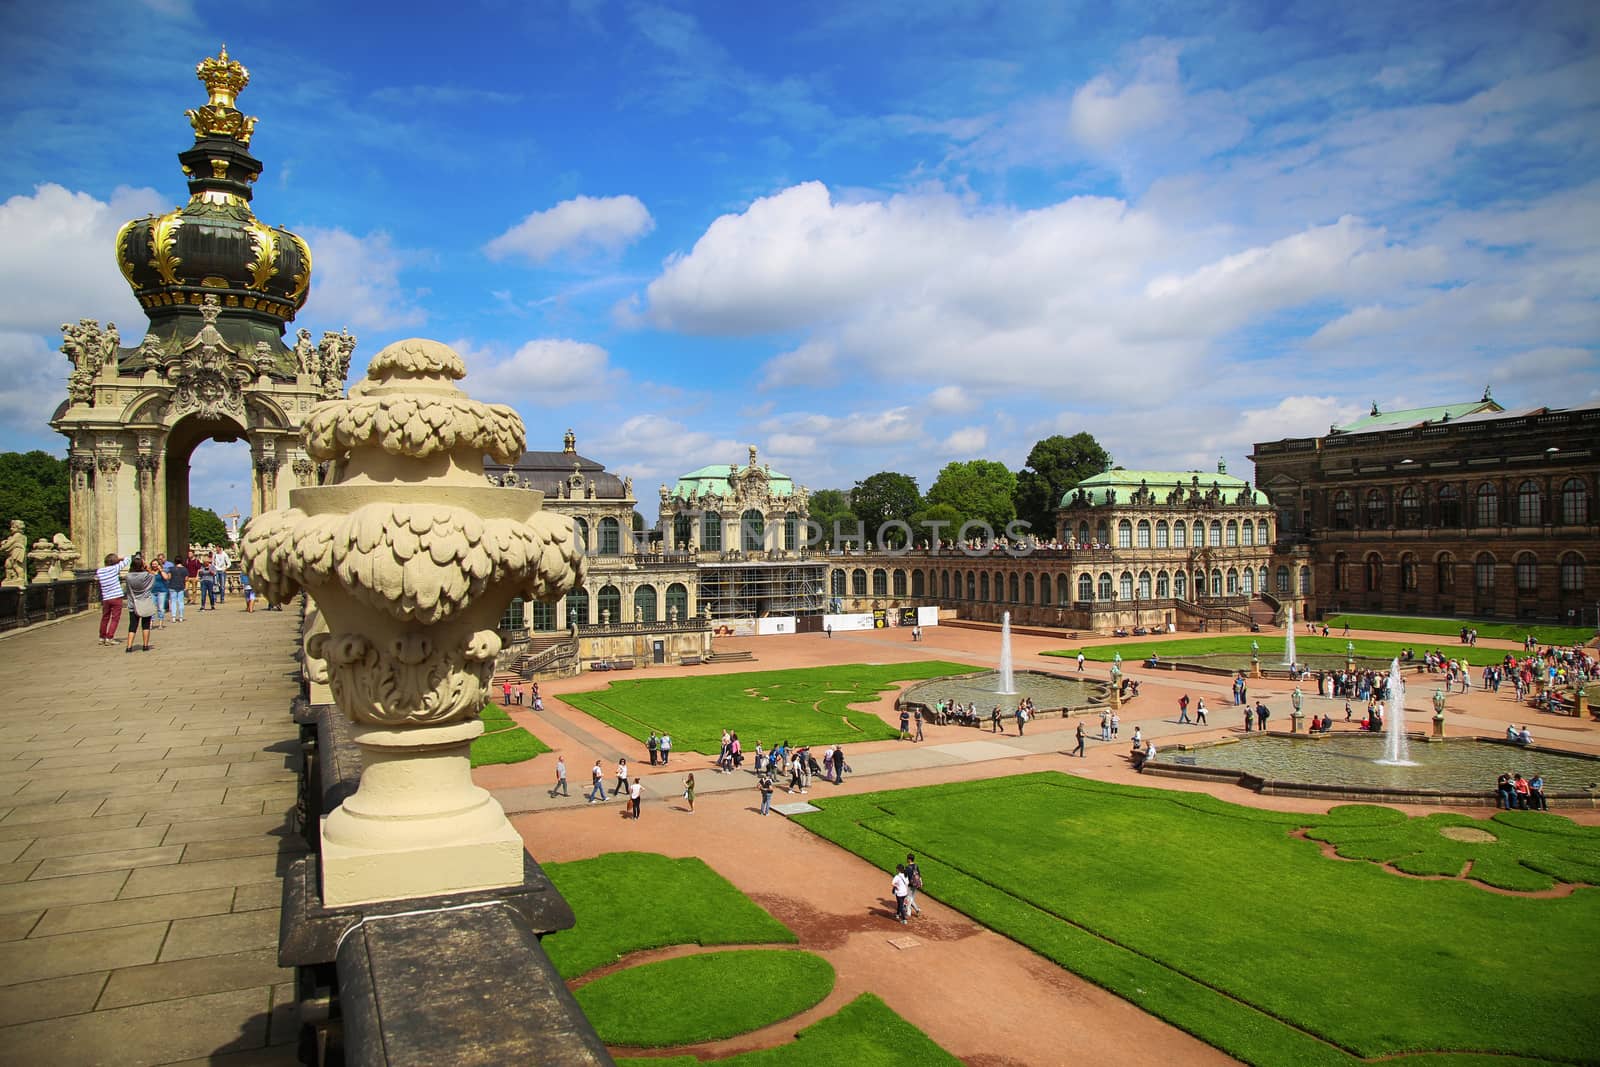 DRESDEN, GERMANY – AUGUST 13, 2016: Tourists walk and visit Dresdner Zwinger, rebuilt after the second world war, the palace is now the most visited monument  in Dresden, Germany on August 13, 2016.